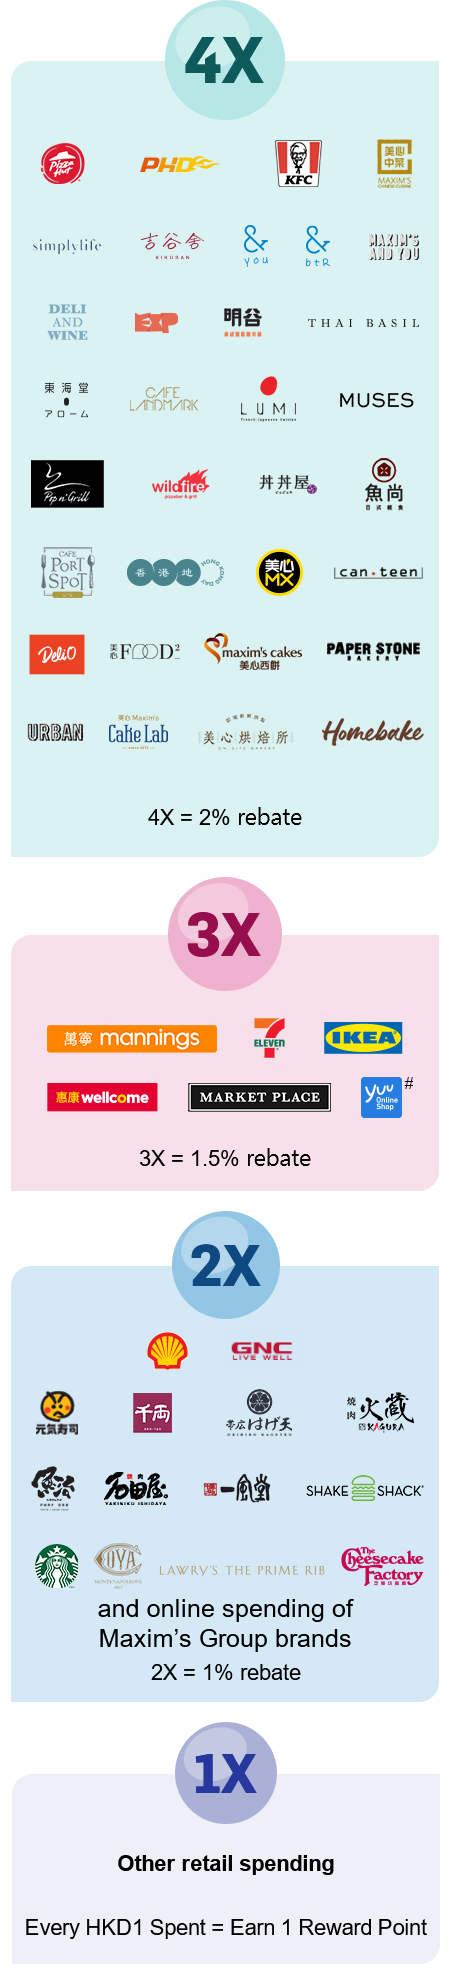 Other retail spending Every HKD1 Spent = Earn 1 Reward Point, GNC and other Maxim's Group brands and outlets 2X = 1% rebate, 3X = 1.5% rebate, 4X = 2% rebate